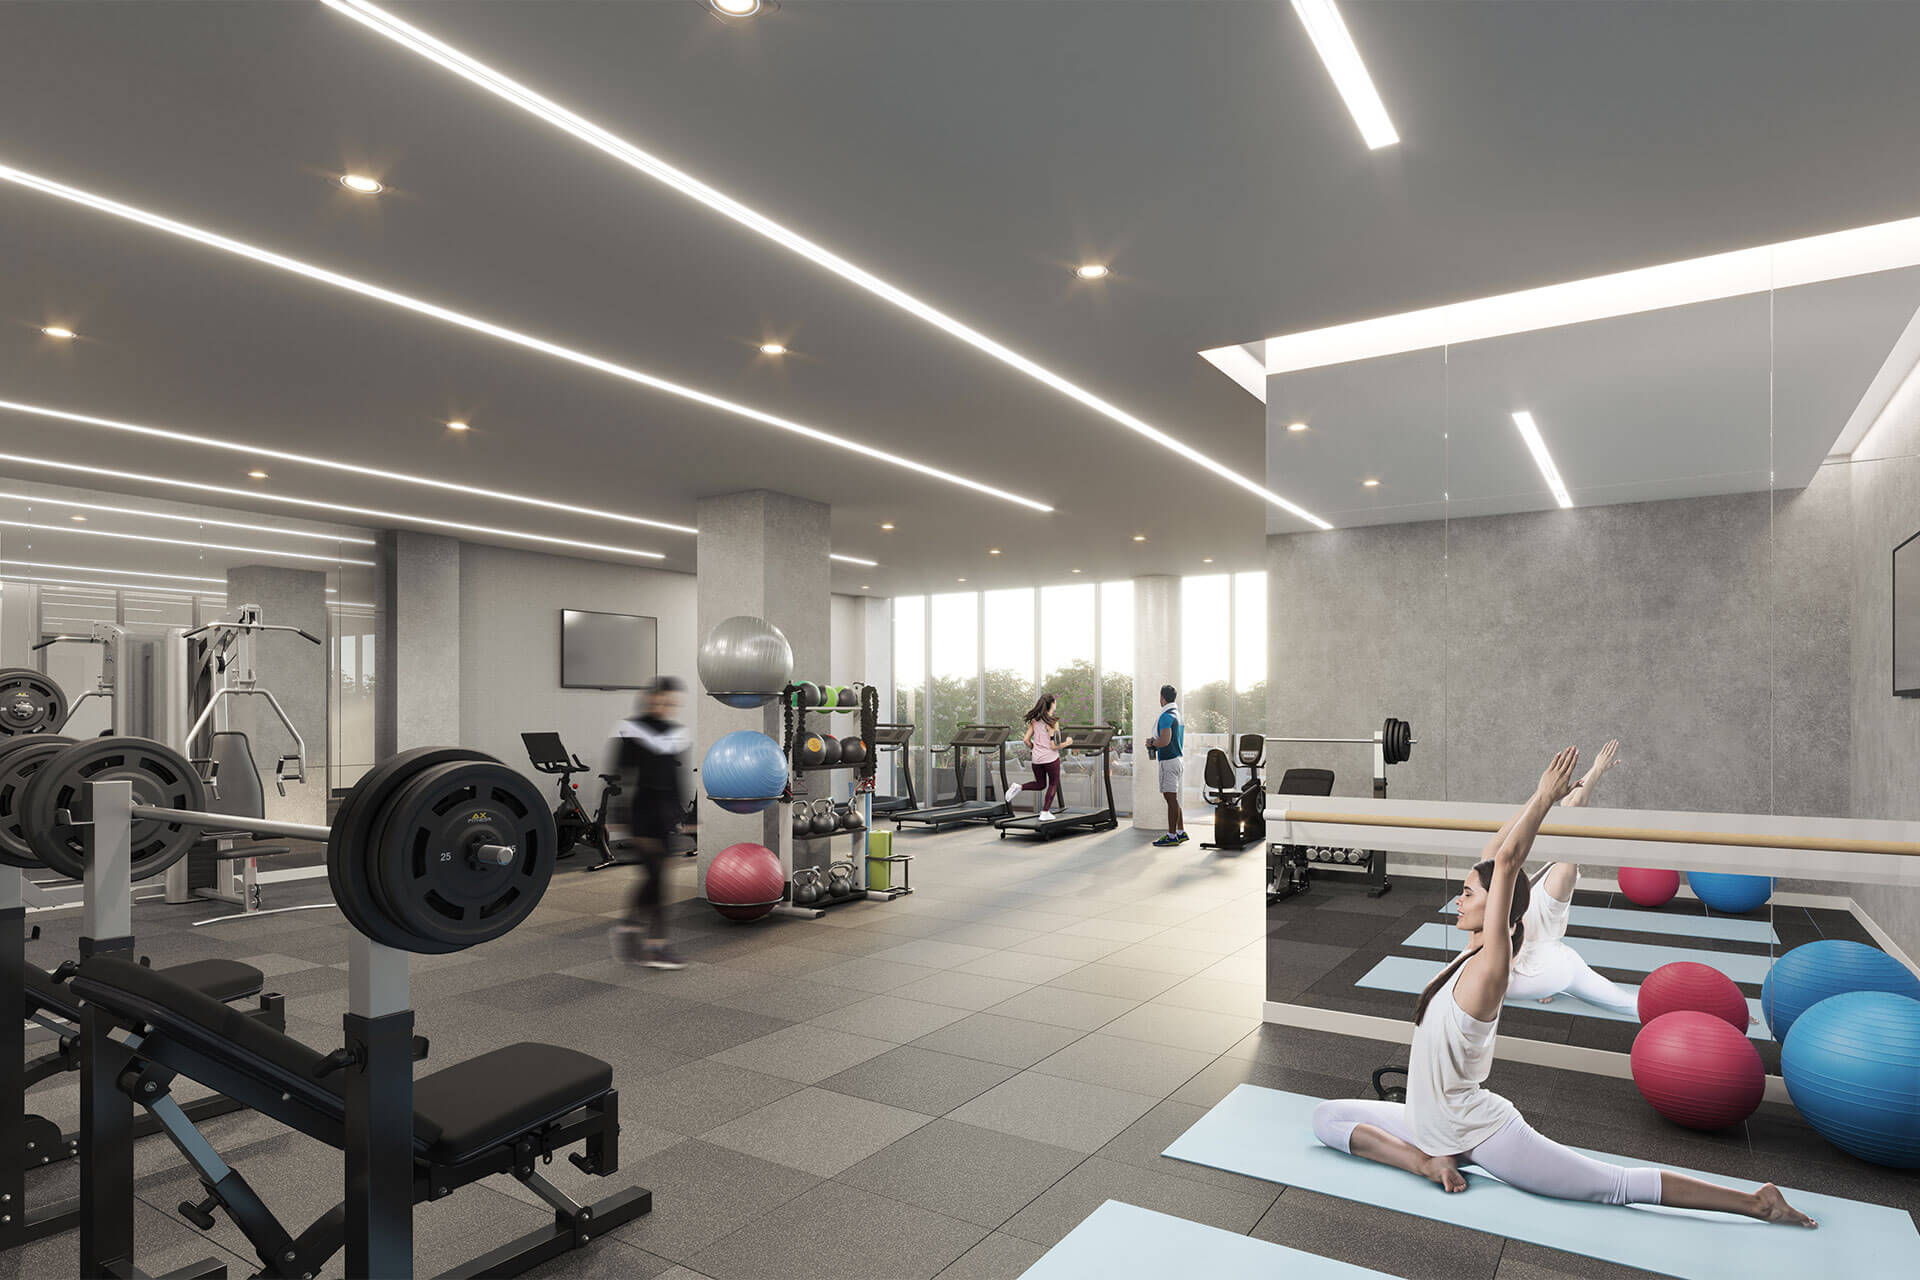 SoHo Club - fully-equipped gym overlooking outdoor terrace